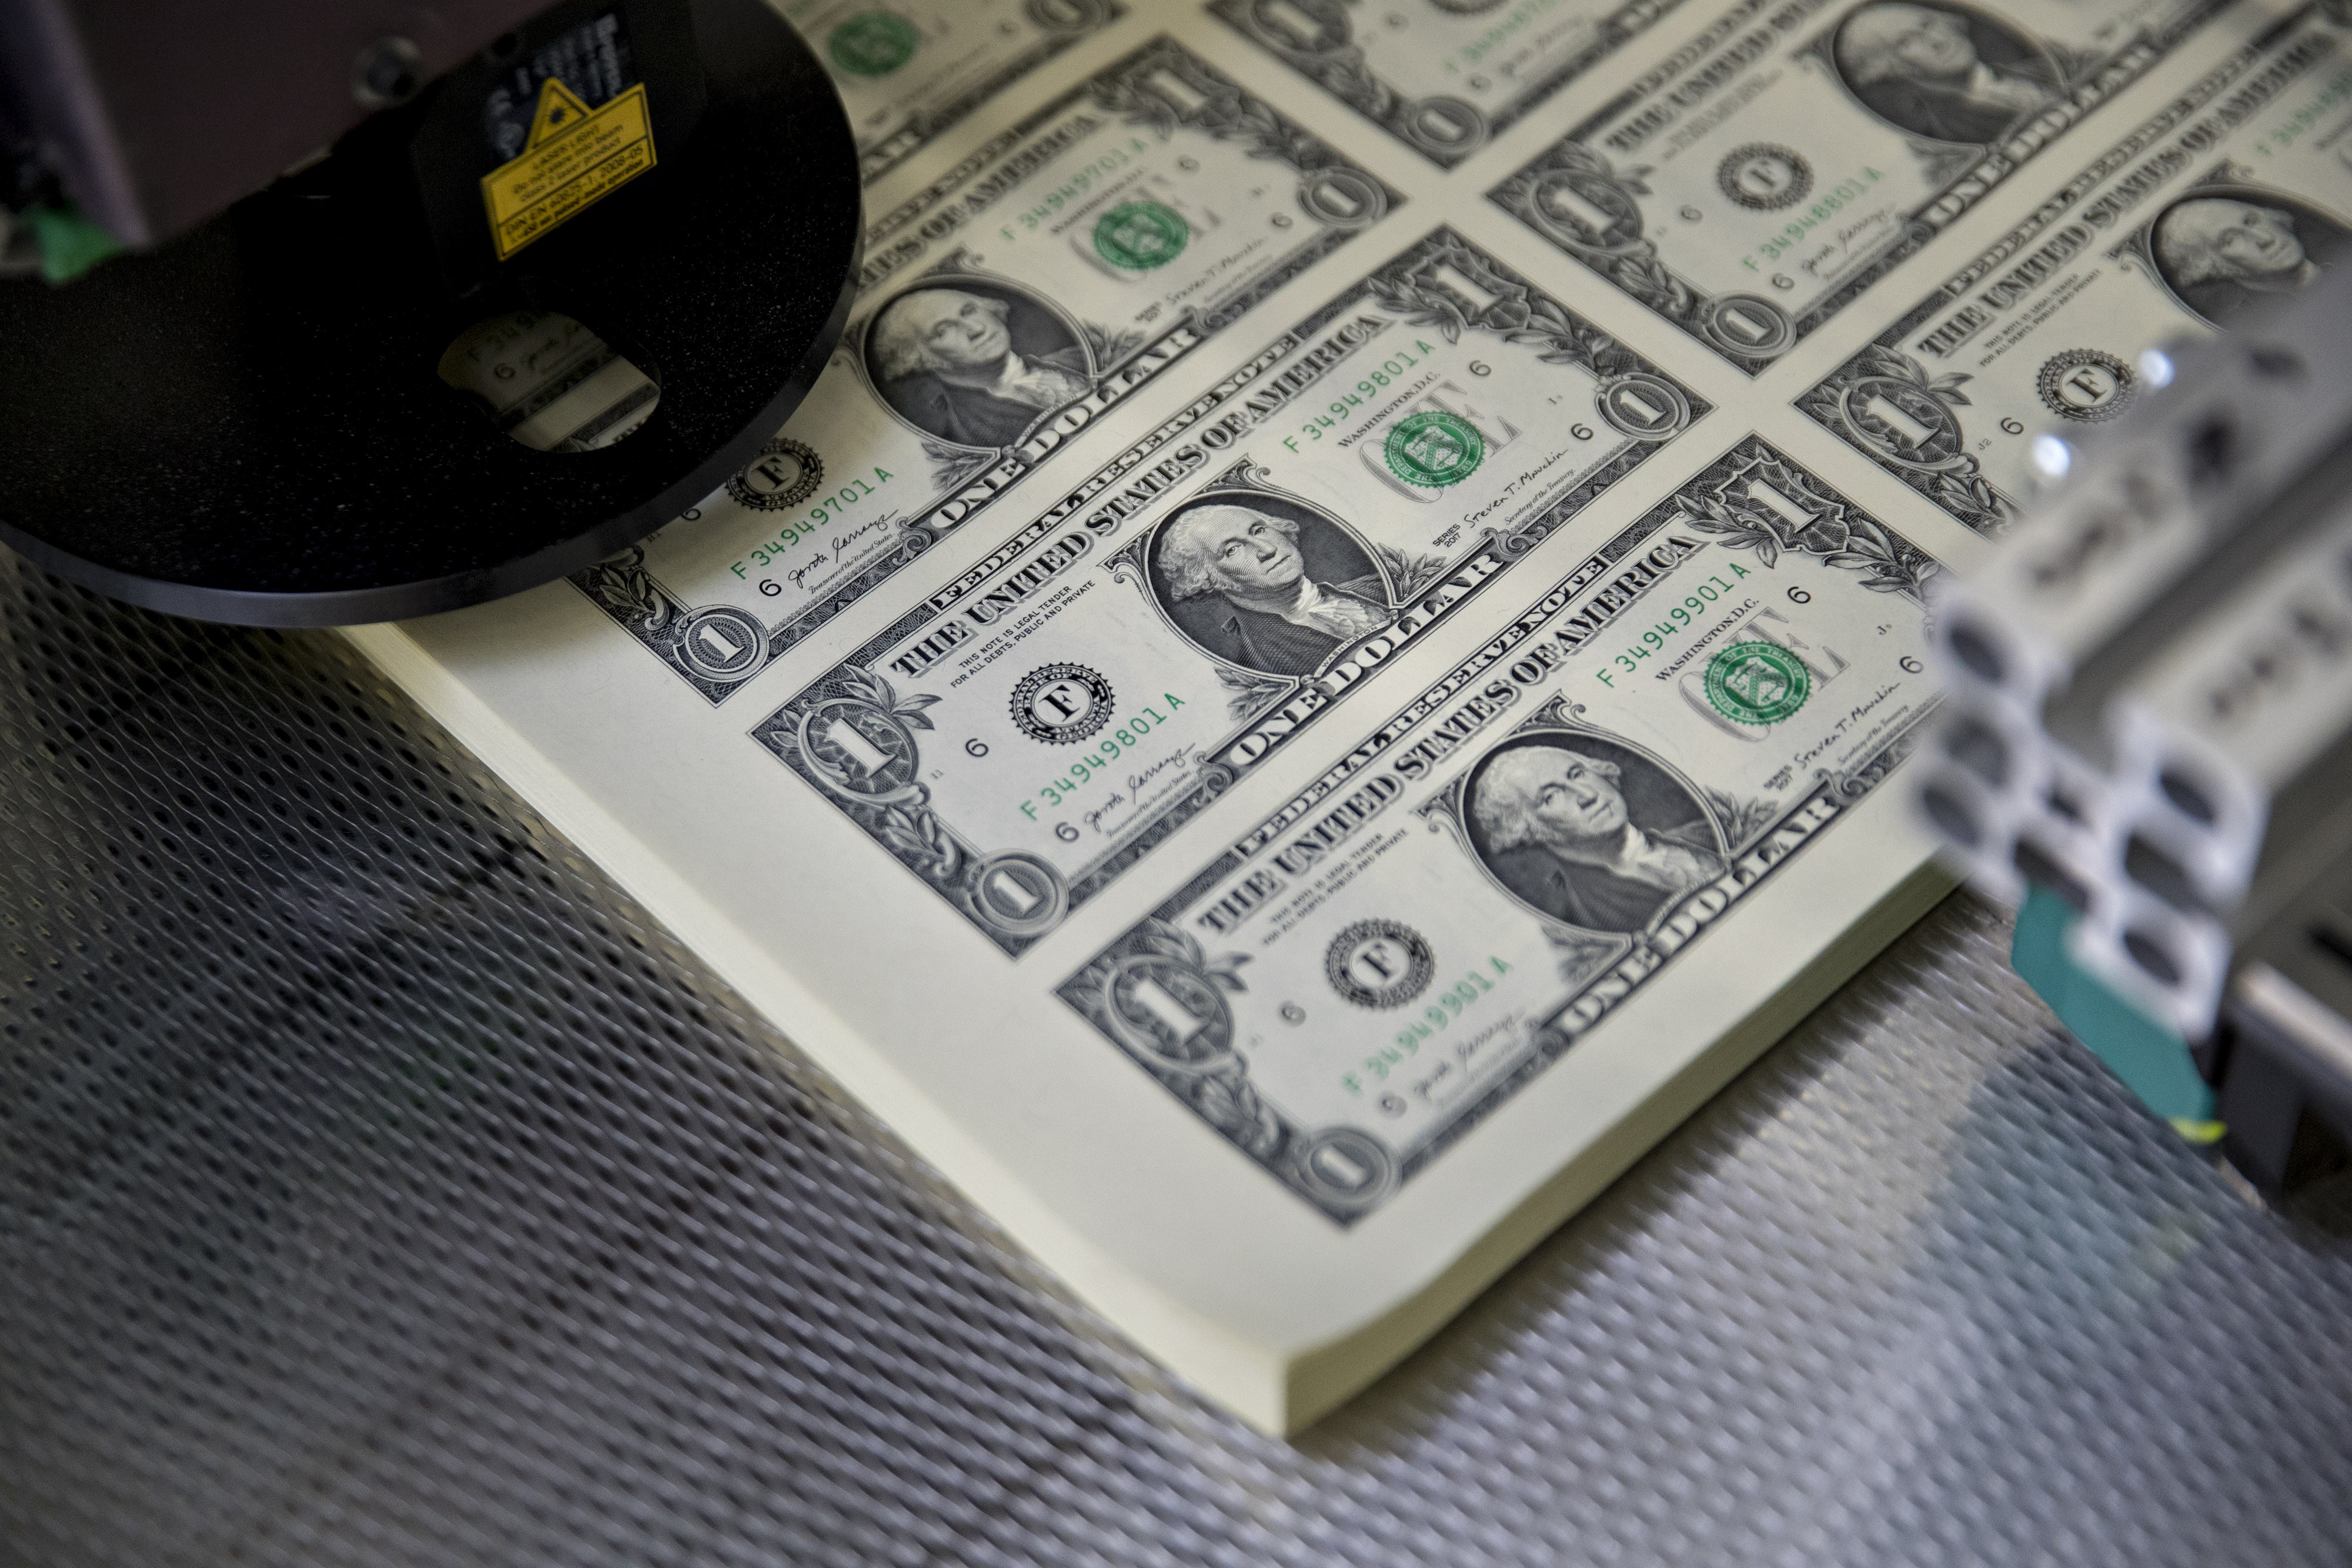 Stacks of uncut sheets of US$1 dollar notes sit in a machine at the US Bureau of Engraving and Printing in Washington on November 15. The dollar’s value has been strong this year, despite expectations and most external indicators. Photo: Bloomberg